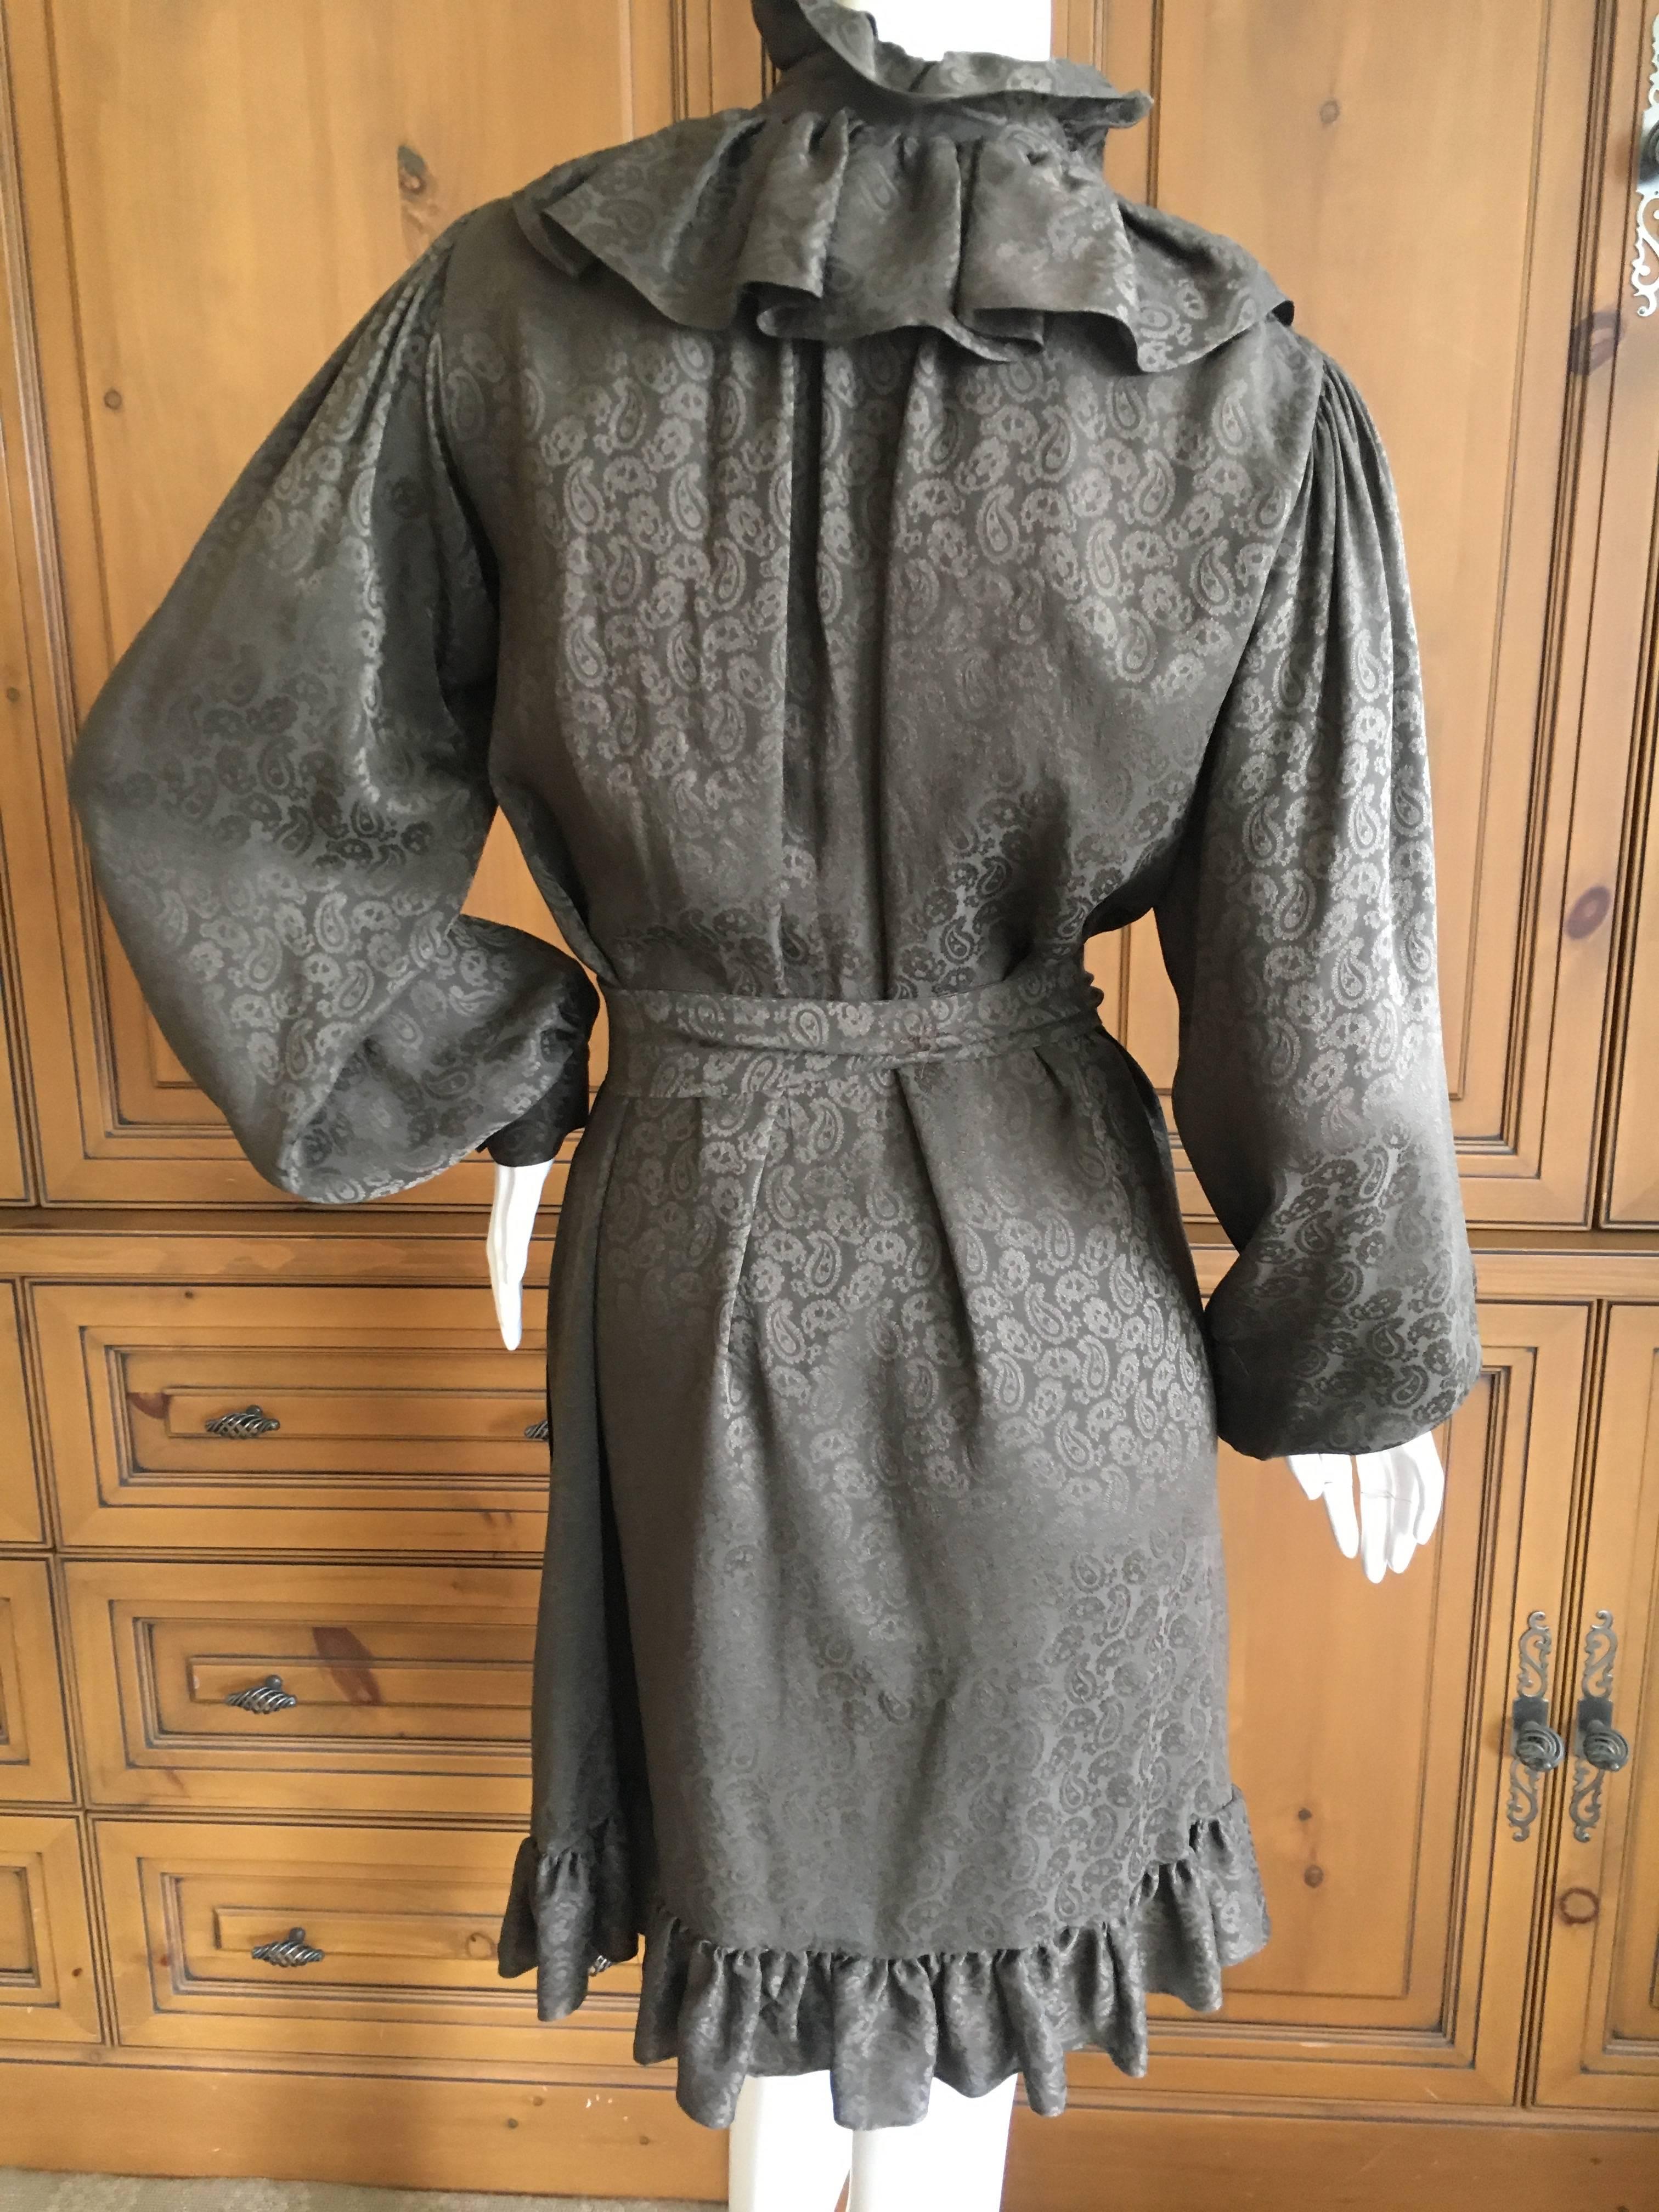 Yves Saint Laurent Vintage 1970's Rive Gauche Silk Paisley Dress with Sash Belt In Excellent Condition For Sale In Cloverdale, CA